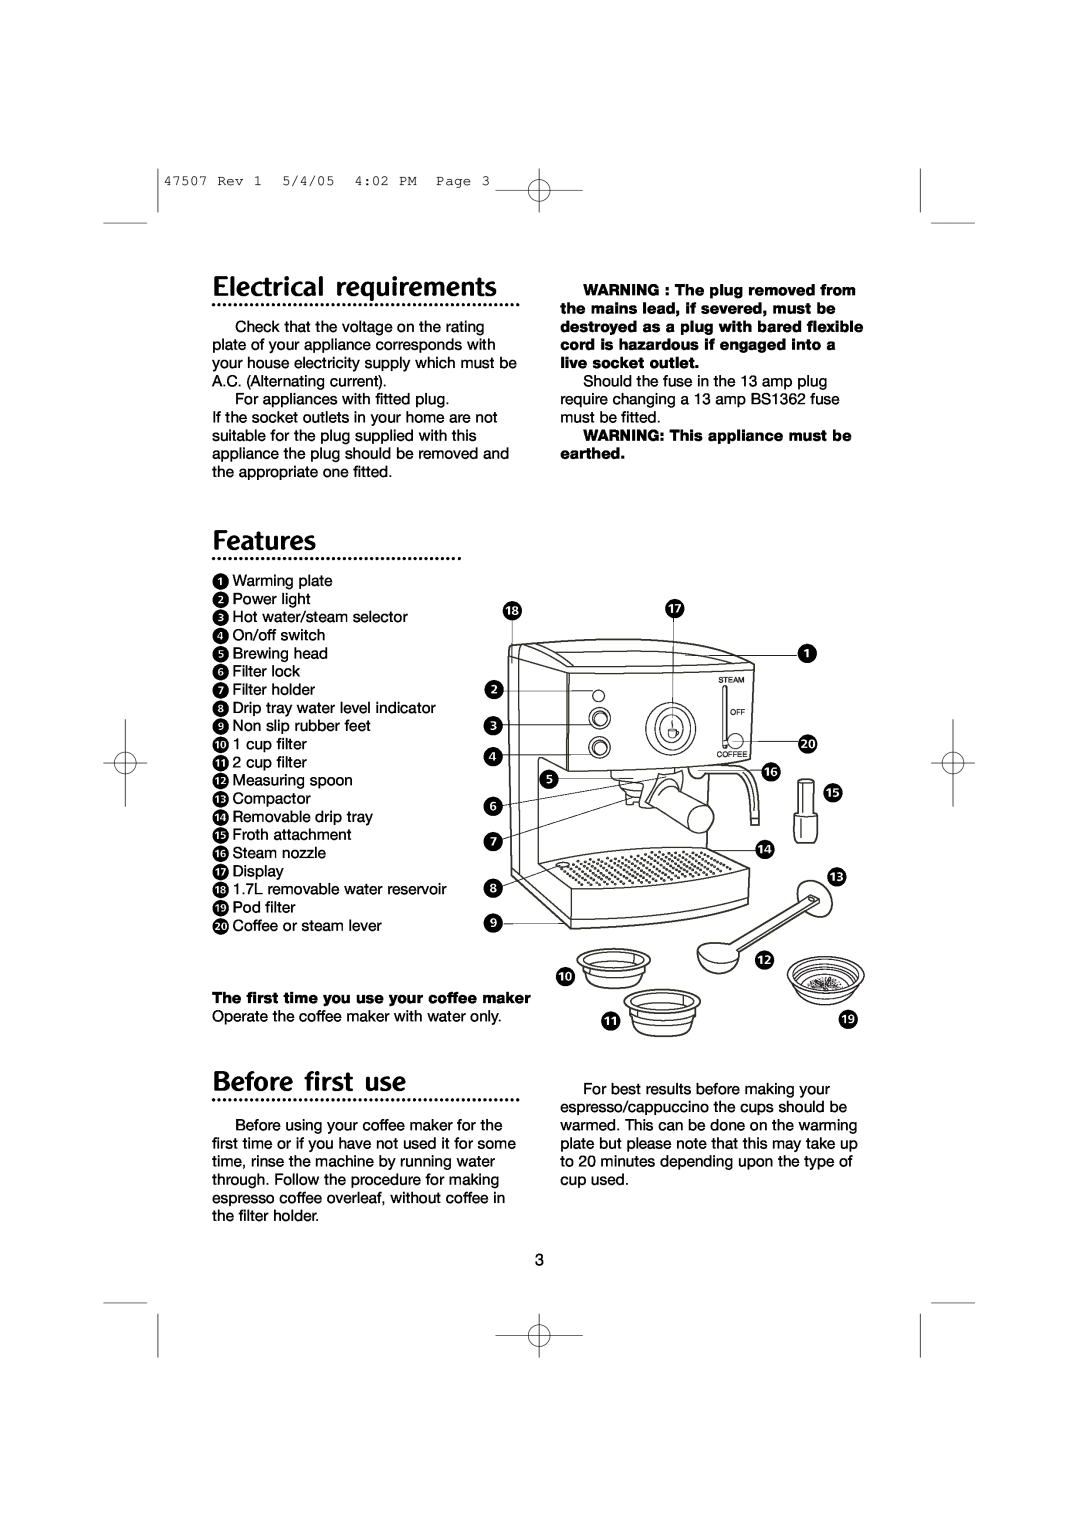 Morphy Richards CoffeMaker manual Electrical requirements, Features, Before first use 